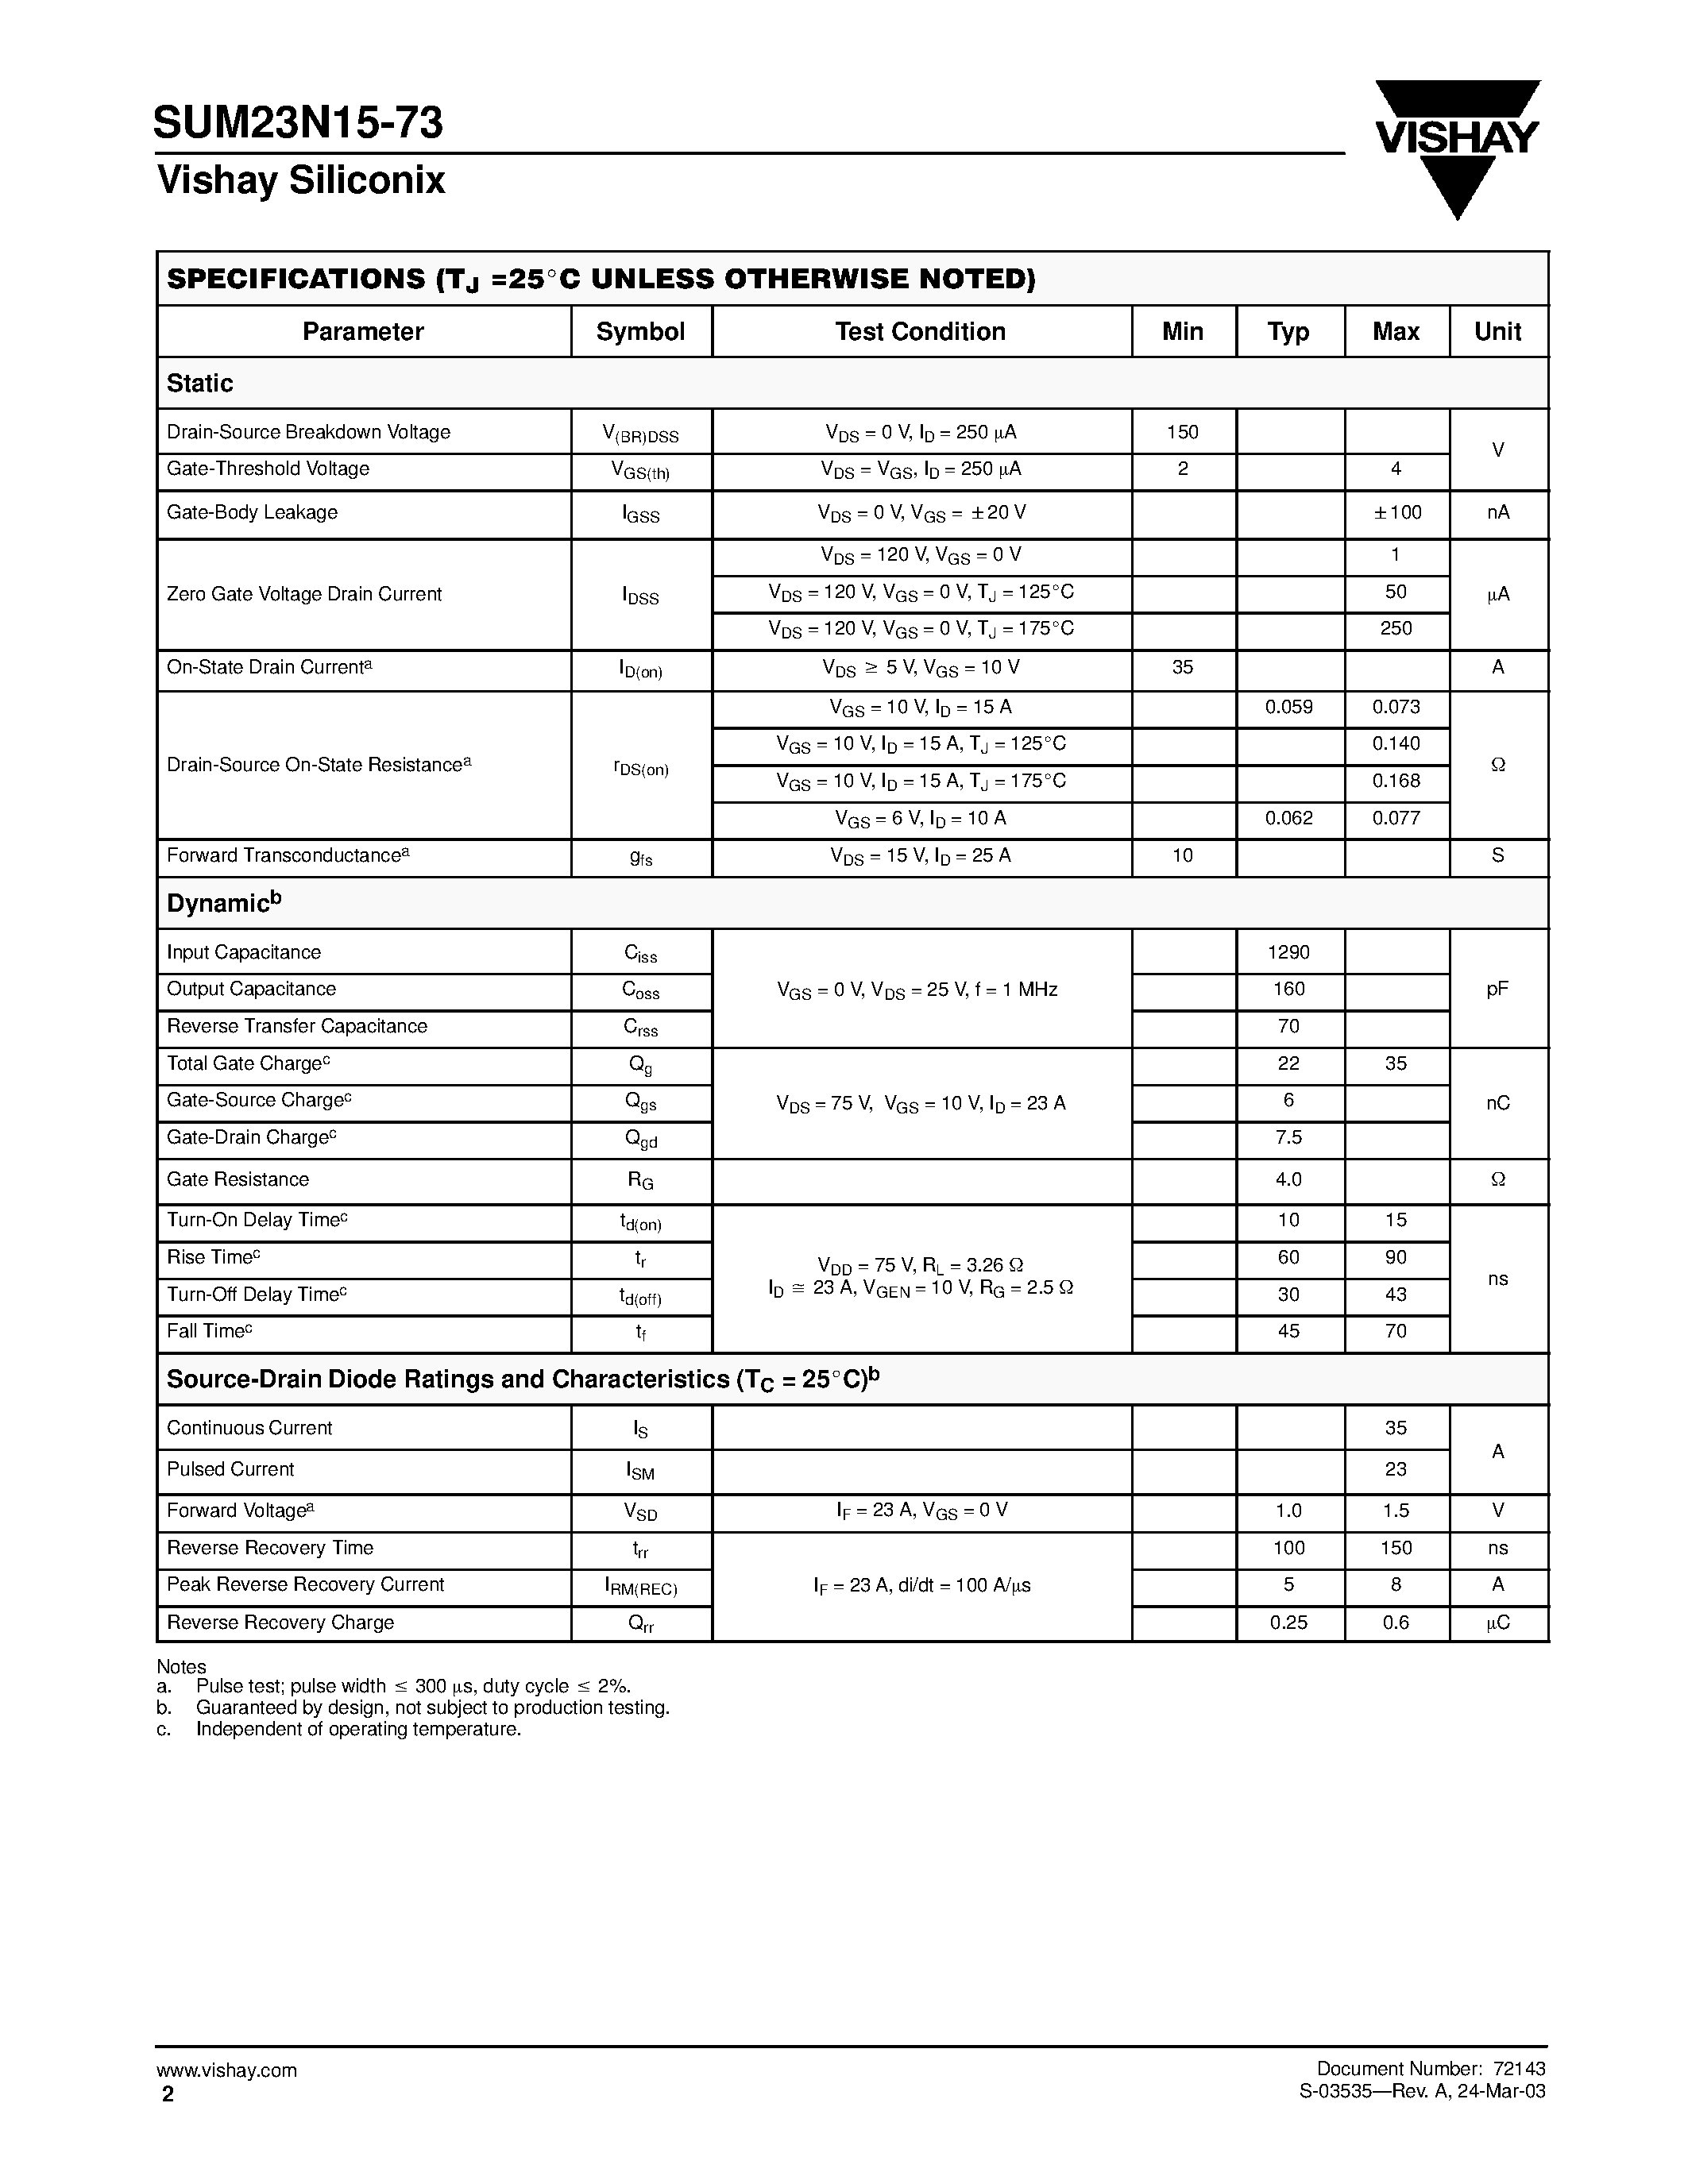 Datasheet SUM23N15-73 - N-Channel 150-V (D-S) 175 C MOSFET page 2